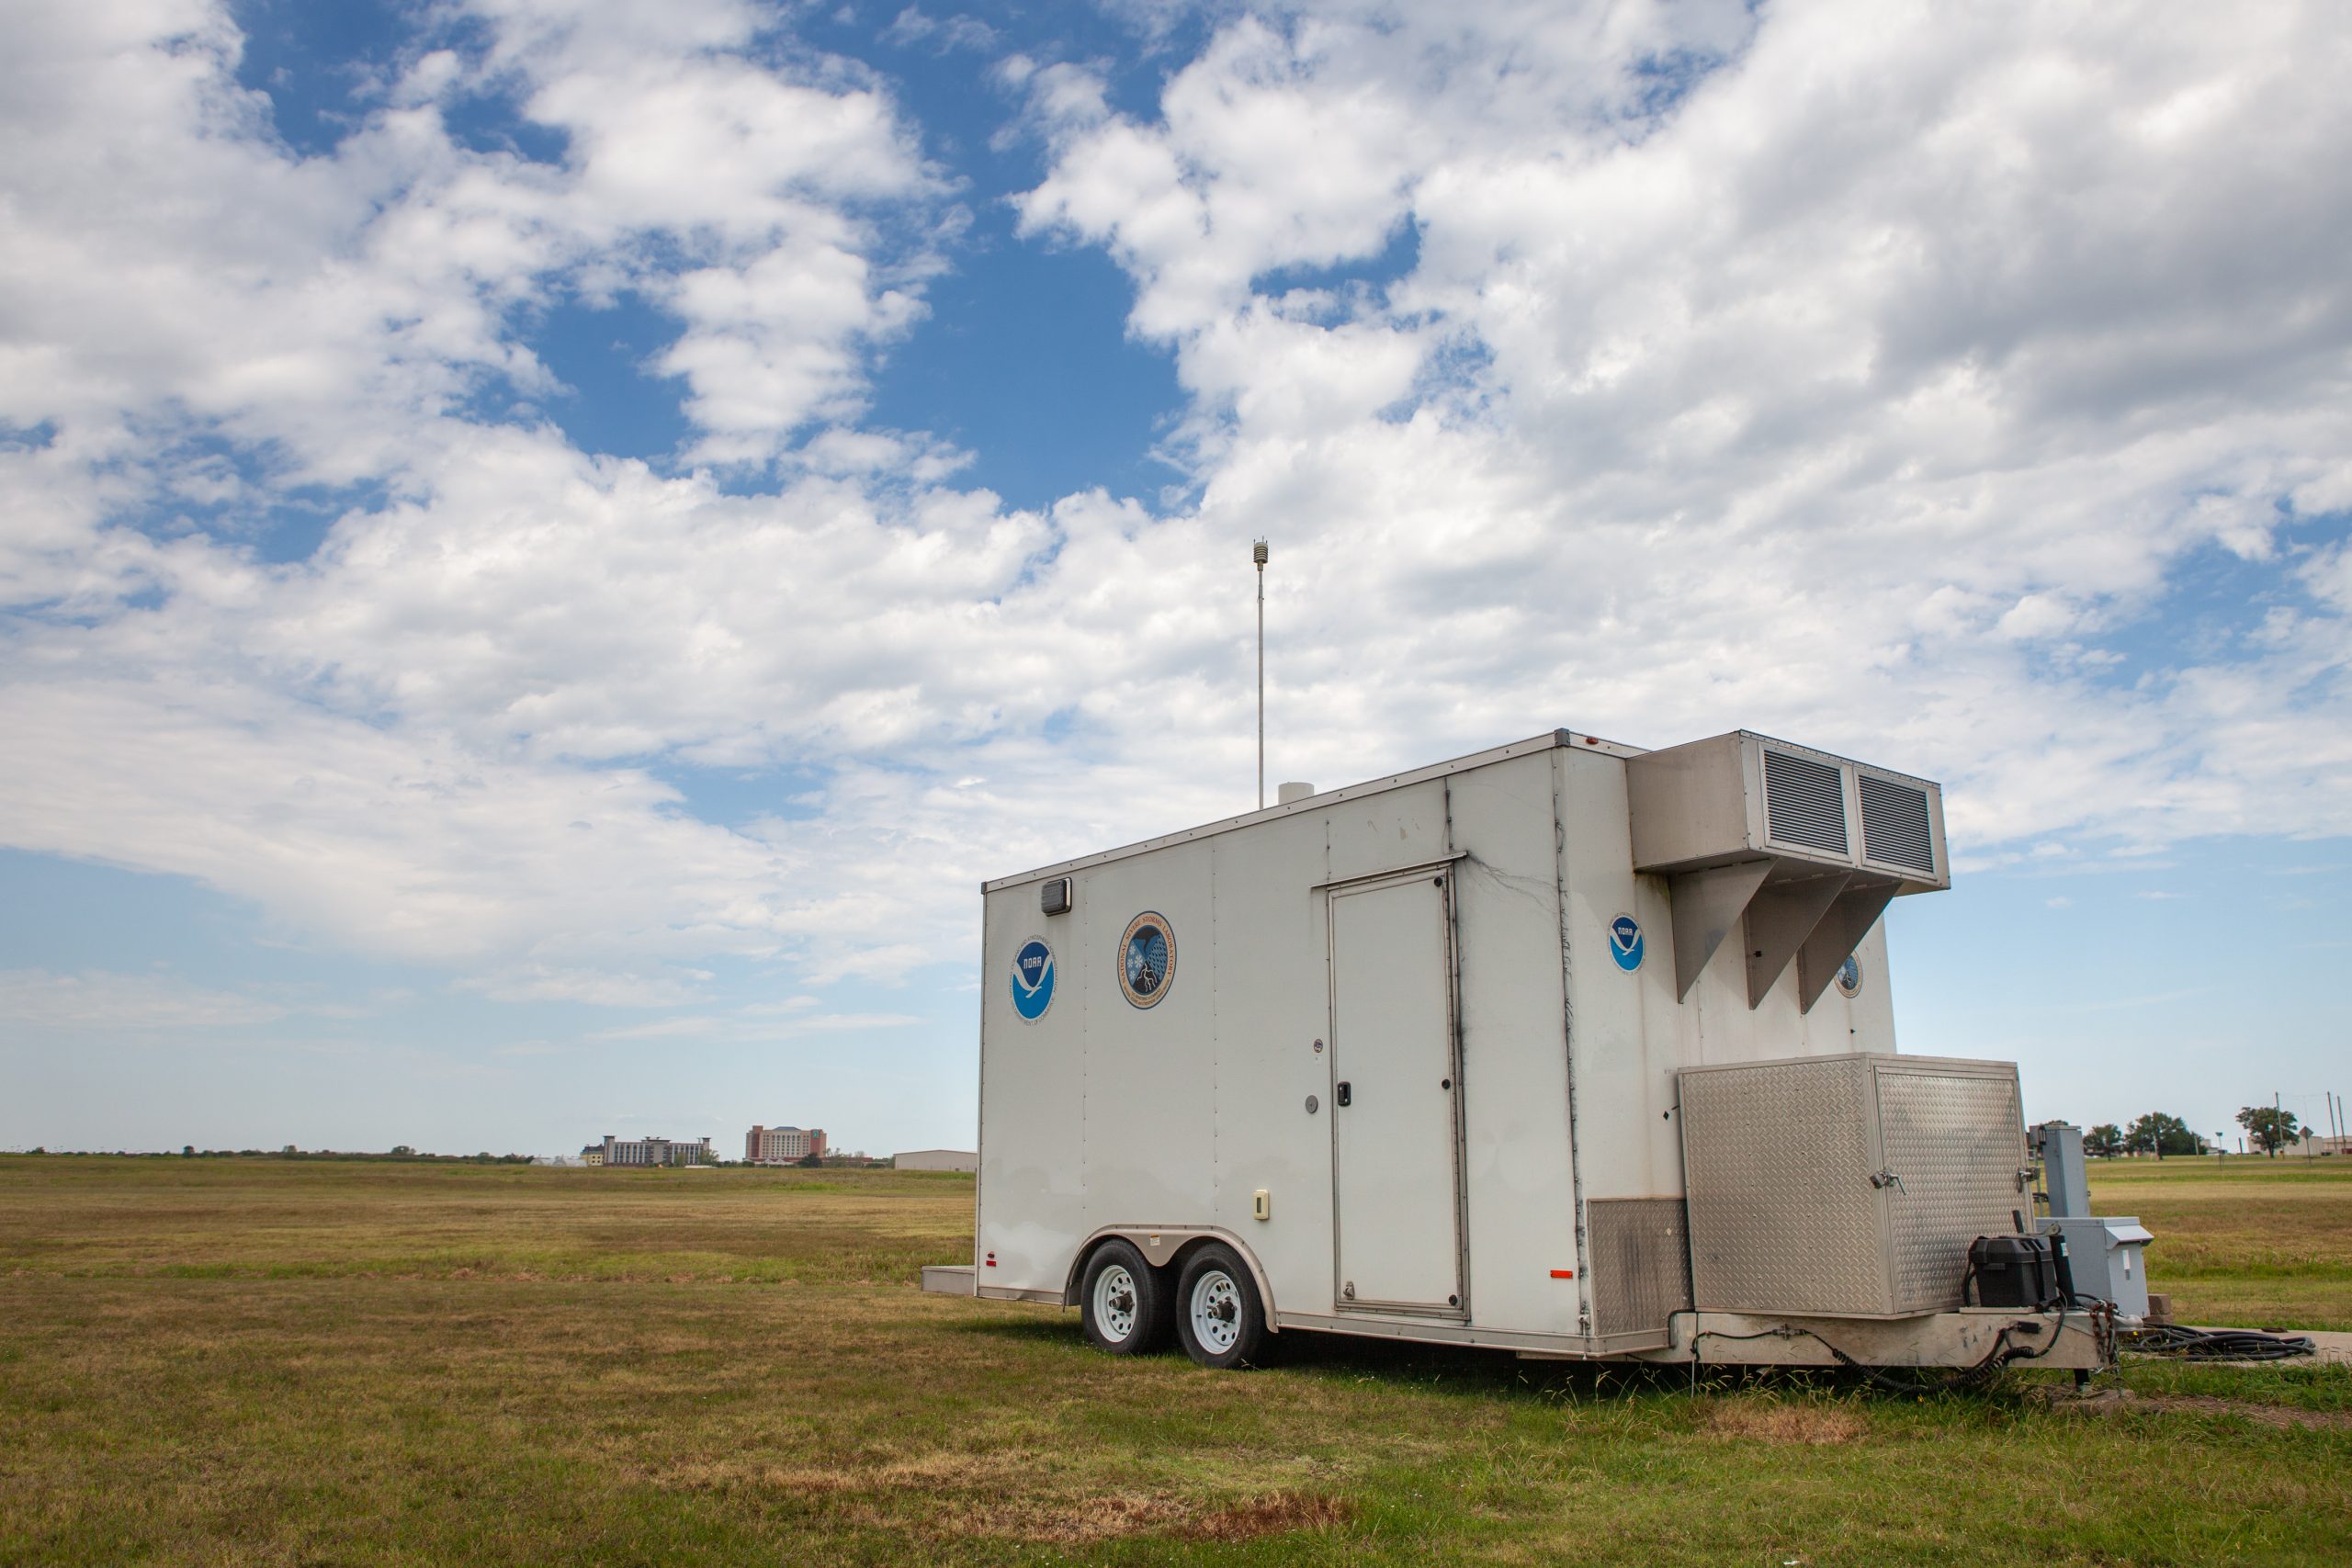 A mobile research trailer parked in a grassy field. The sky is cloudy and blue above.